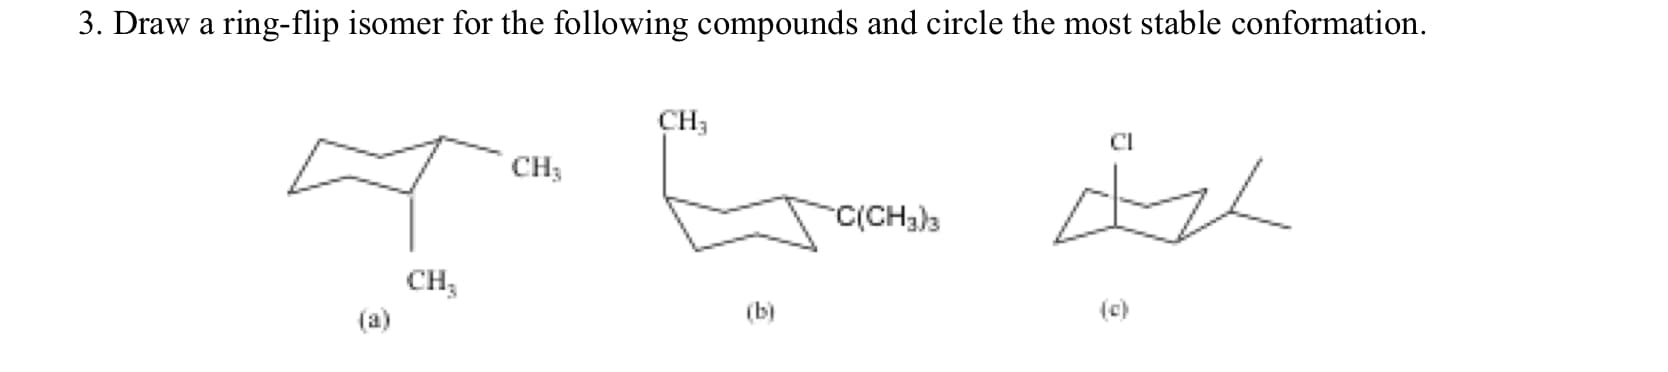 3. Draw a ring-flip isomer for the following compounds and circle the most stable conformation.
